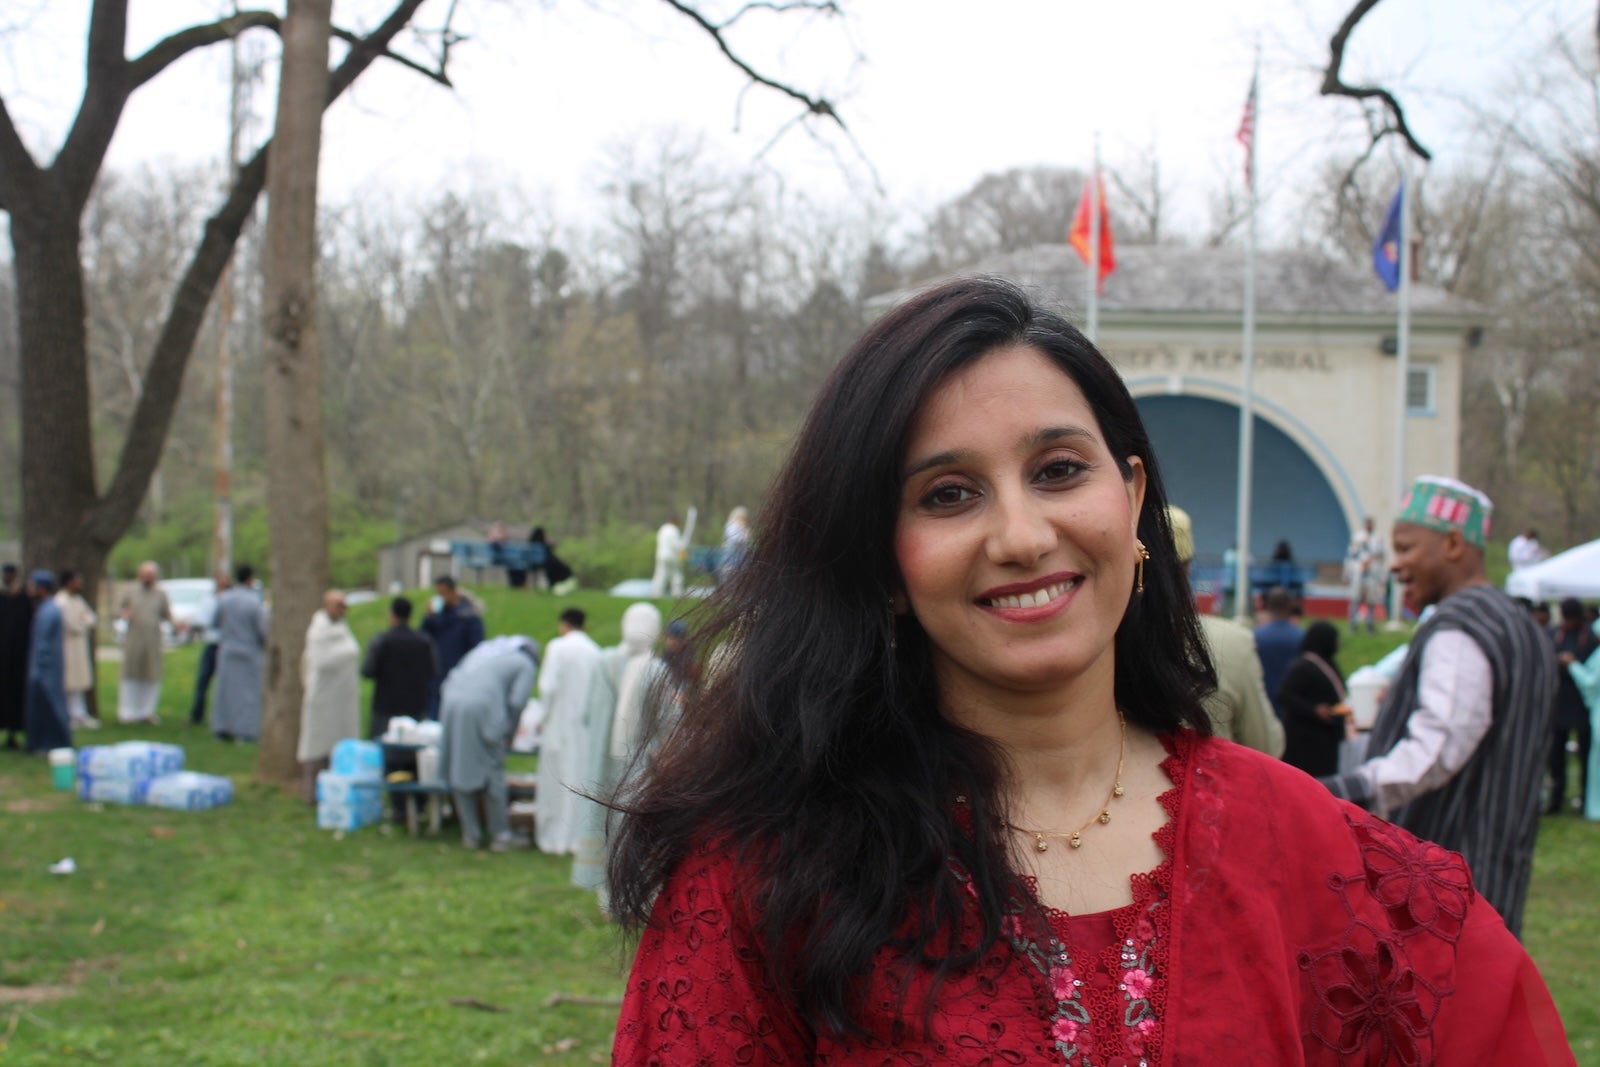 Ammara Chaudhry poses for a photo at an Eid celebration in Norristown